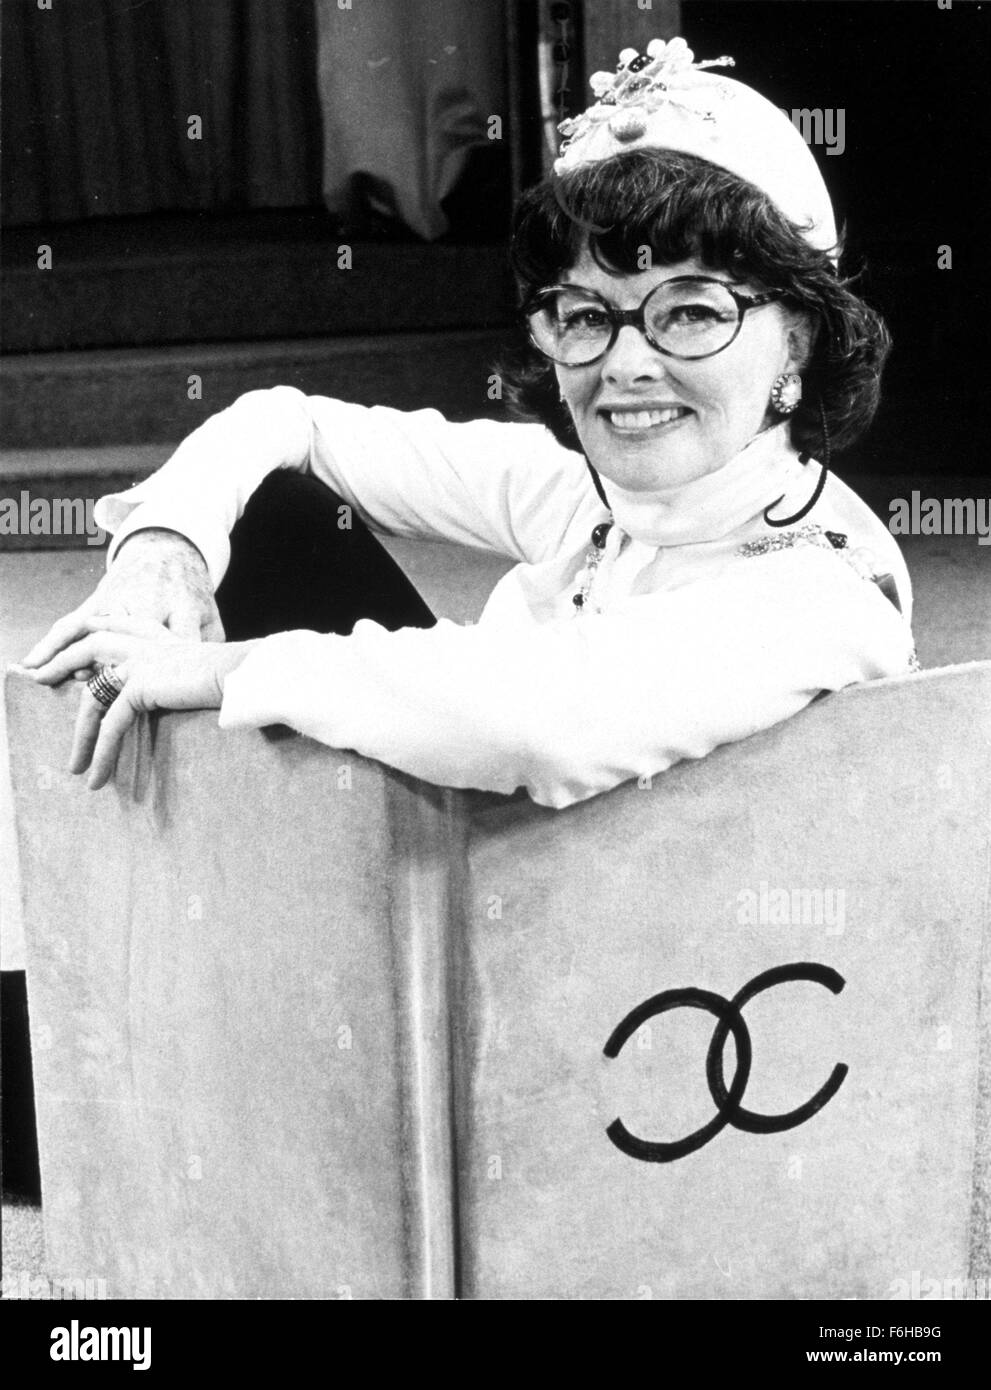 1969, Film Title: COCO, Studio: BROADWAY STAGE, Pictured: KATHARINE HEPBURN, CLOWNING, COMEDY, GLASSES, CHARACTER, GEEK. (Credit Image: SNAP) Stock Photo